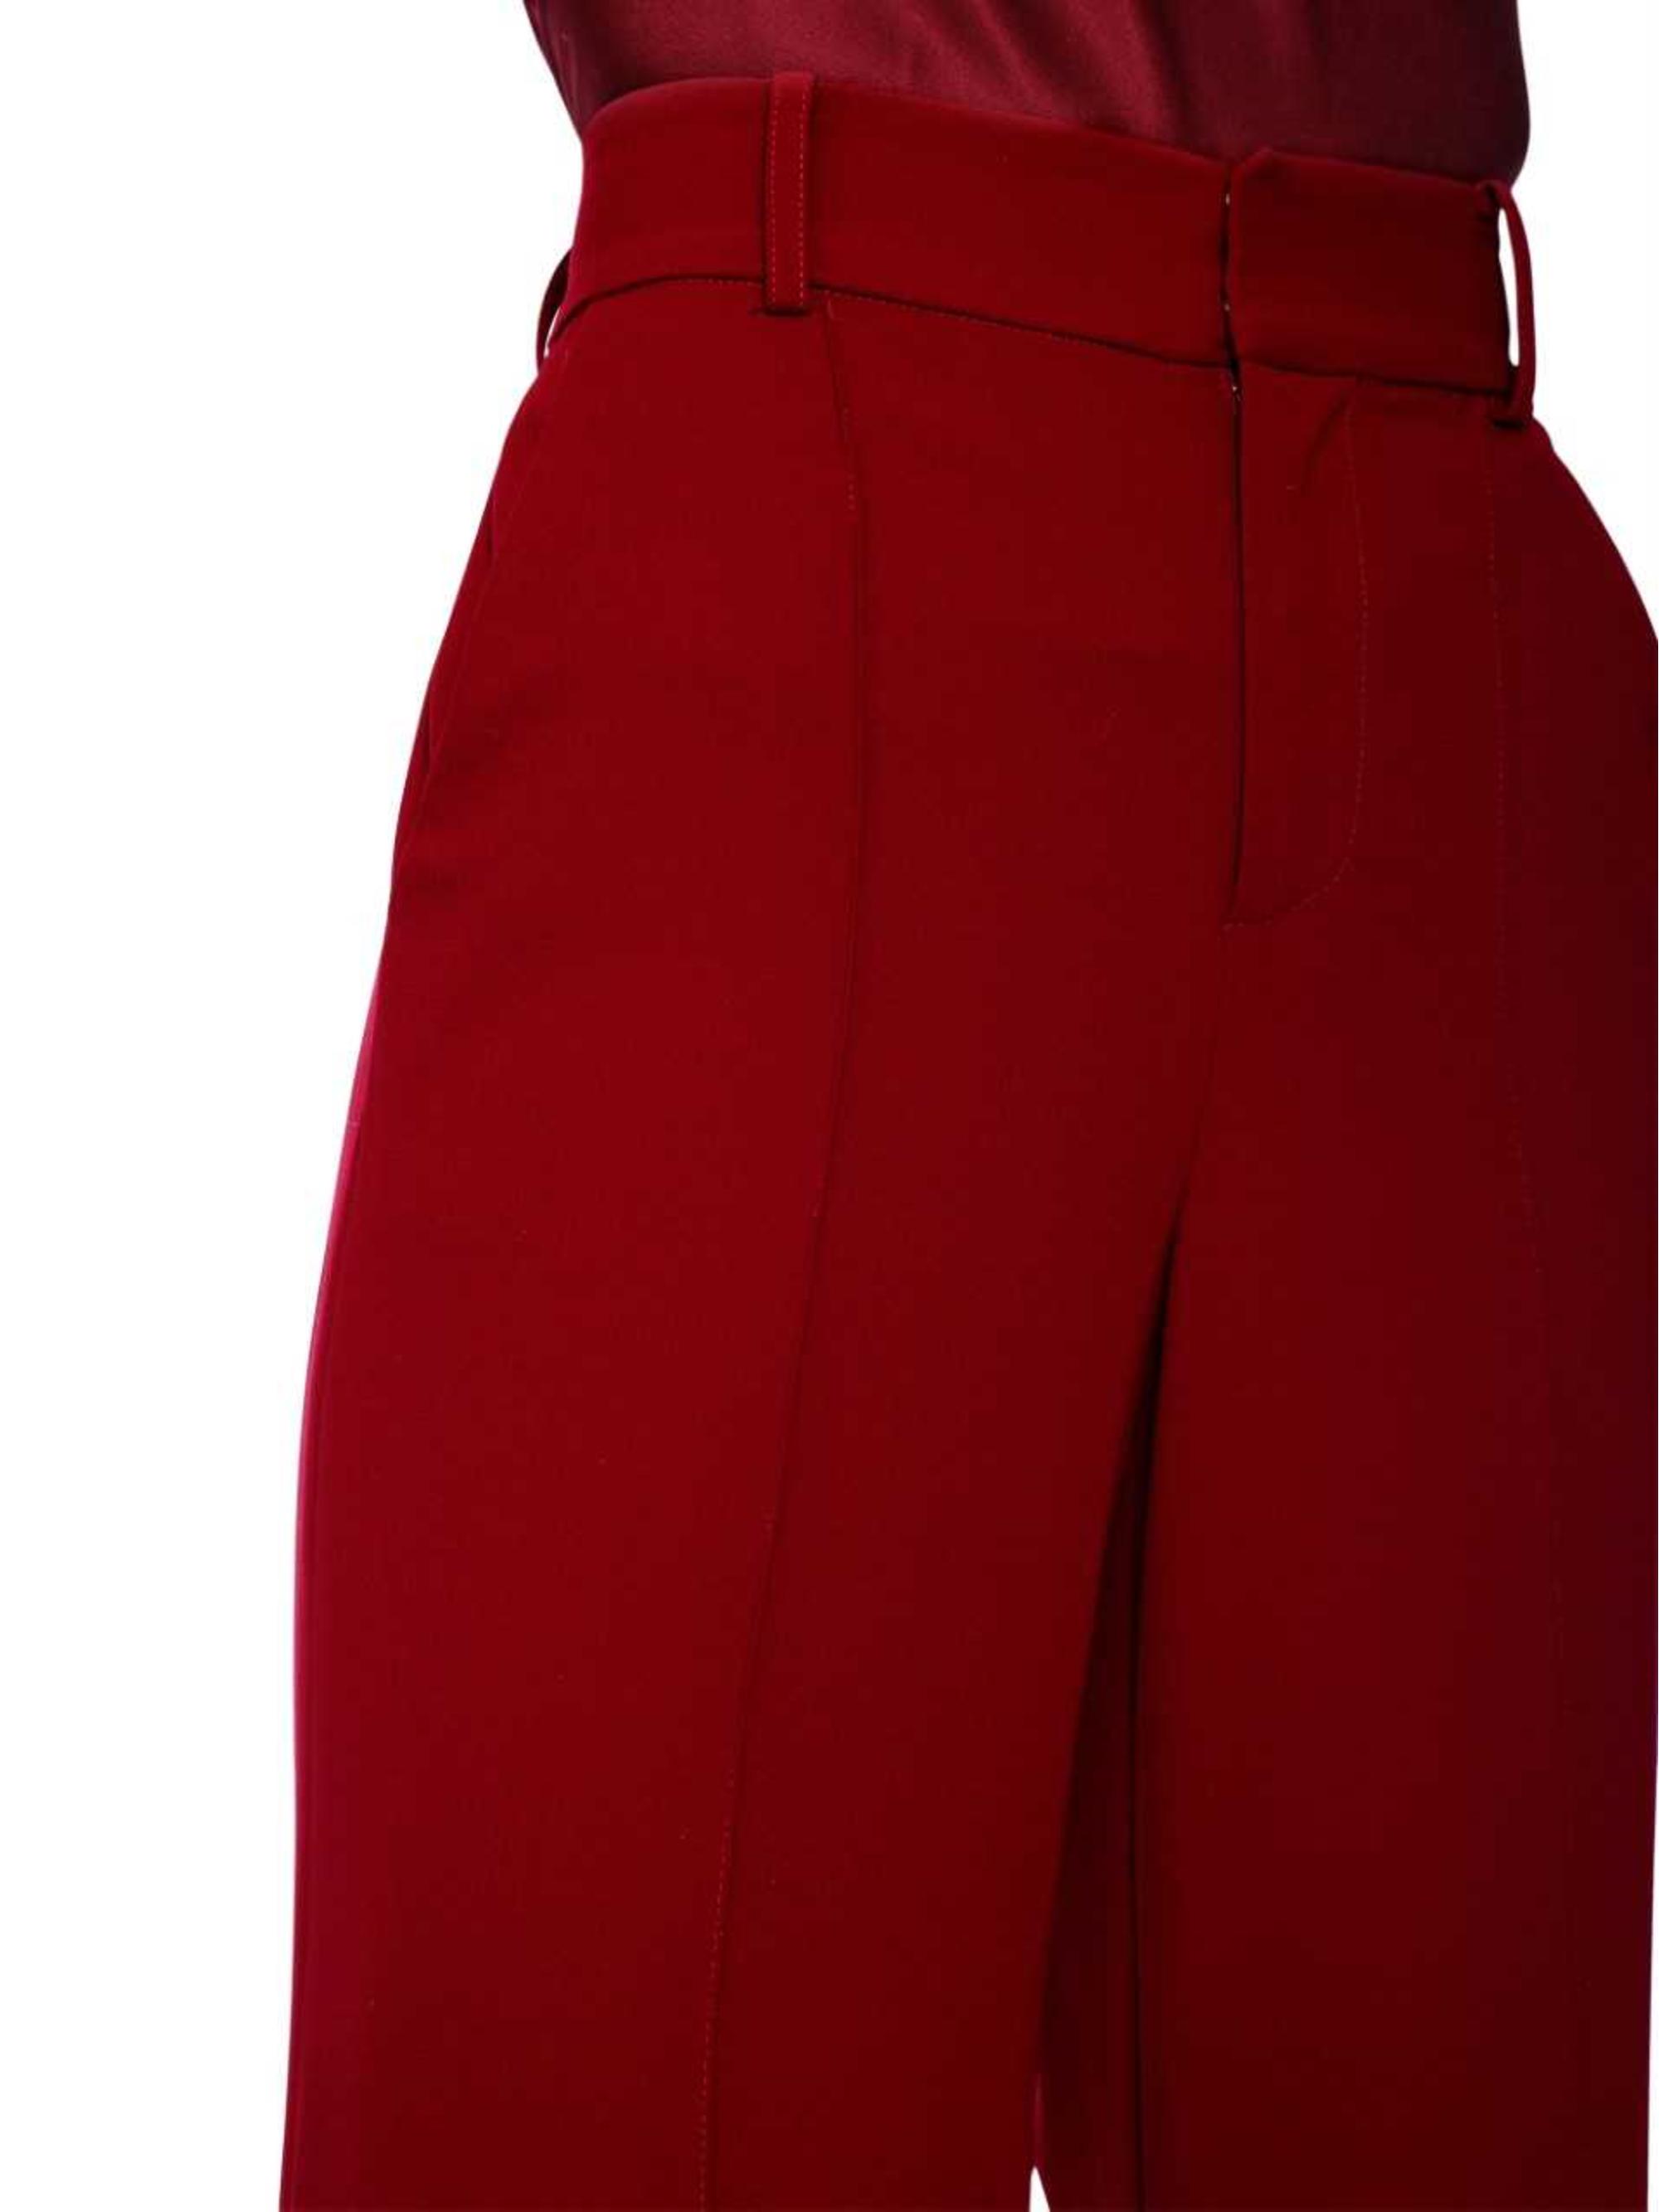 Alice + Olivia Synthetic Paula High Waist Pintuck Pant in Bordeaux (Red ...